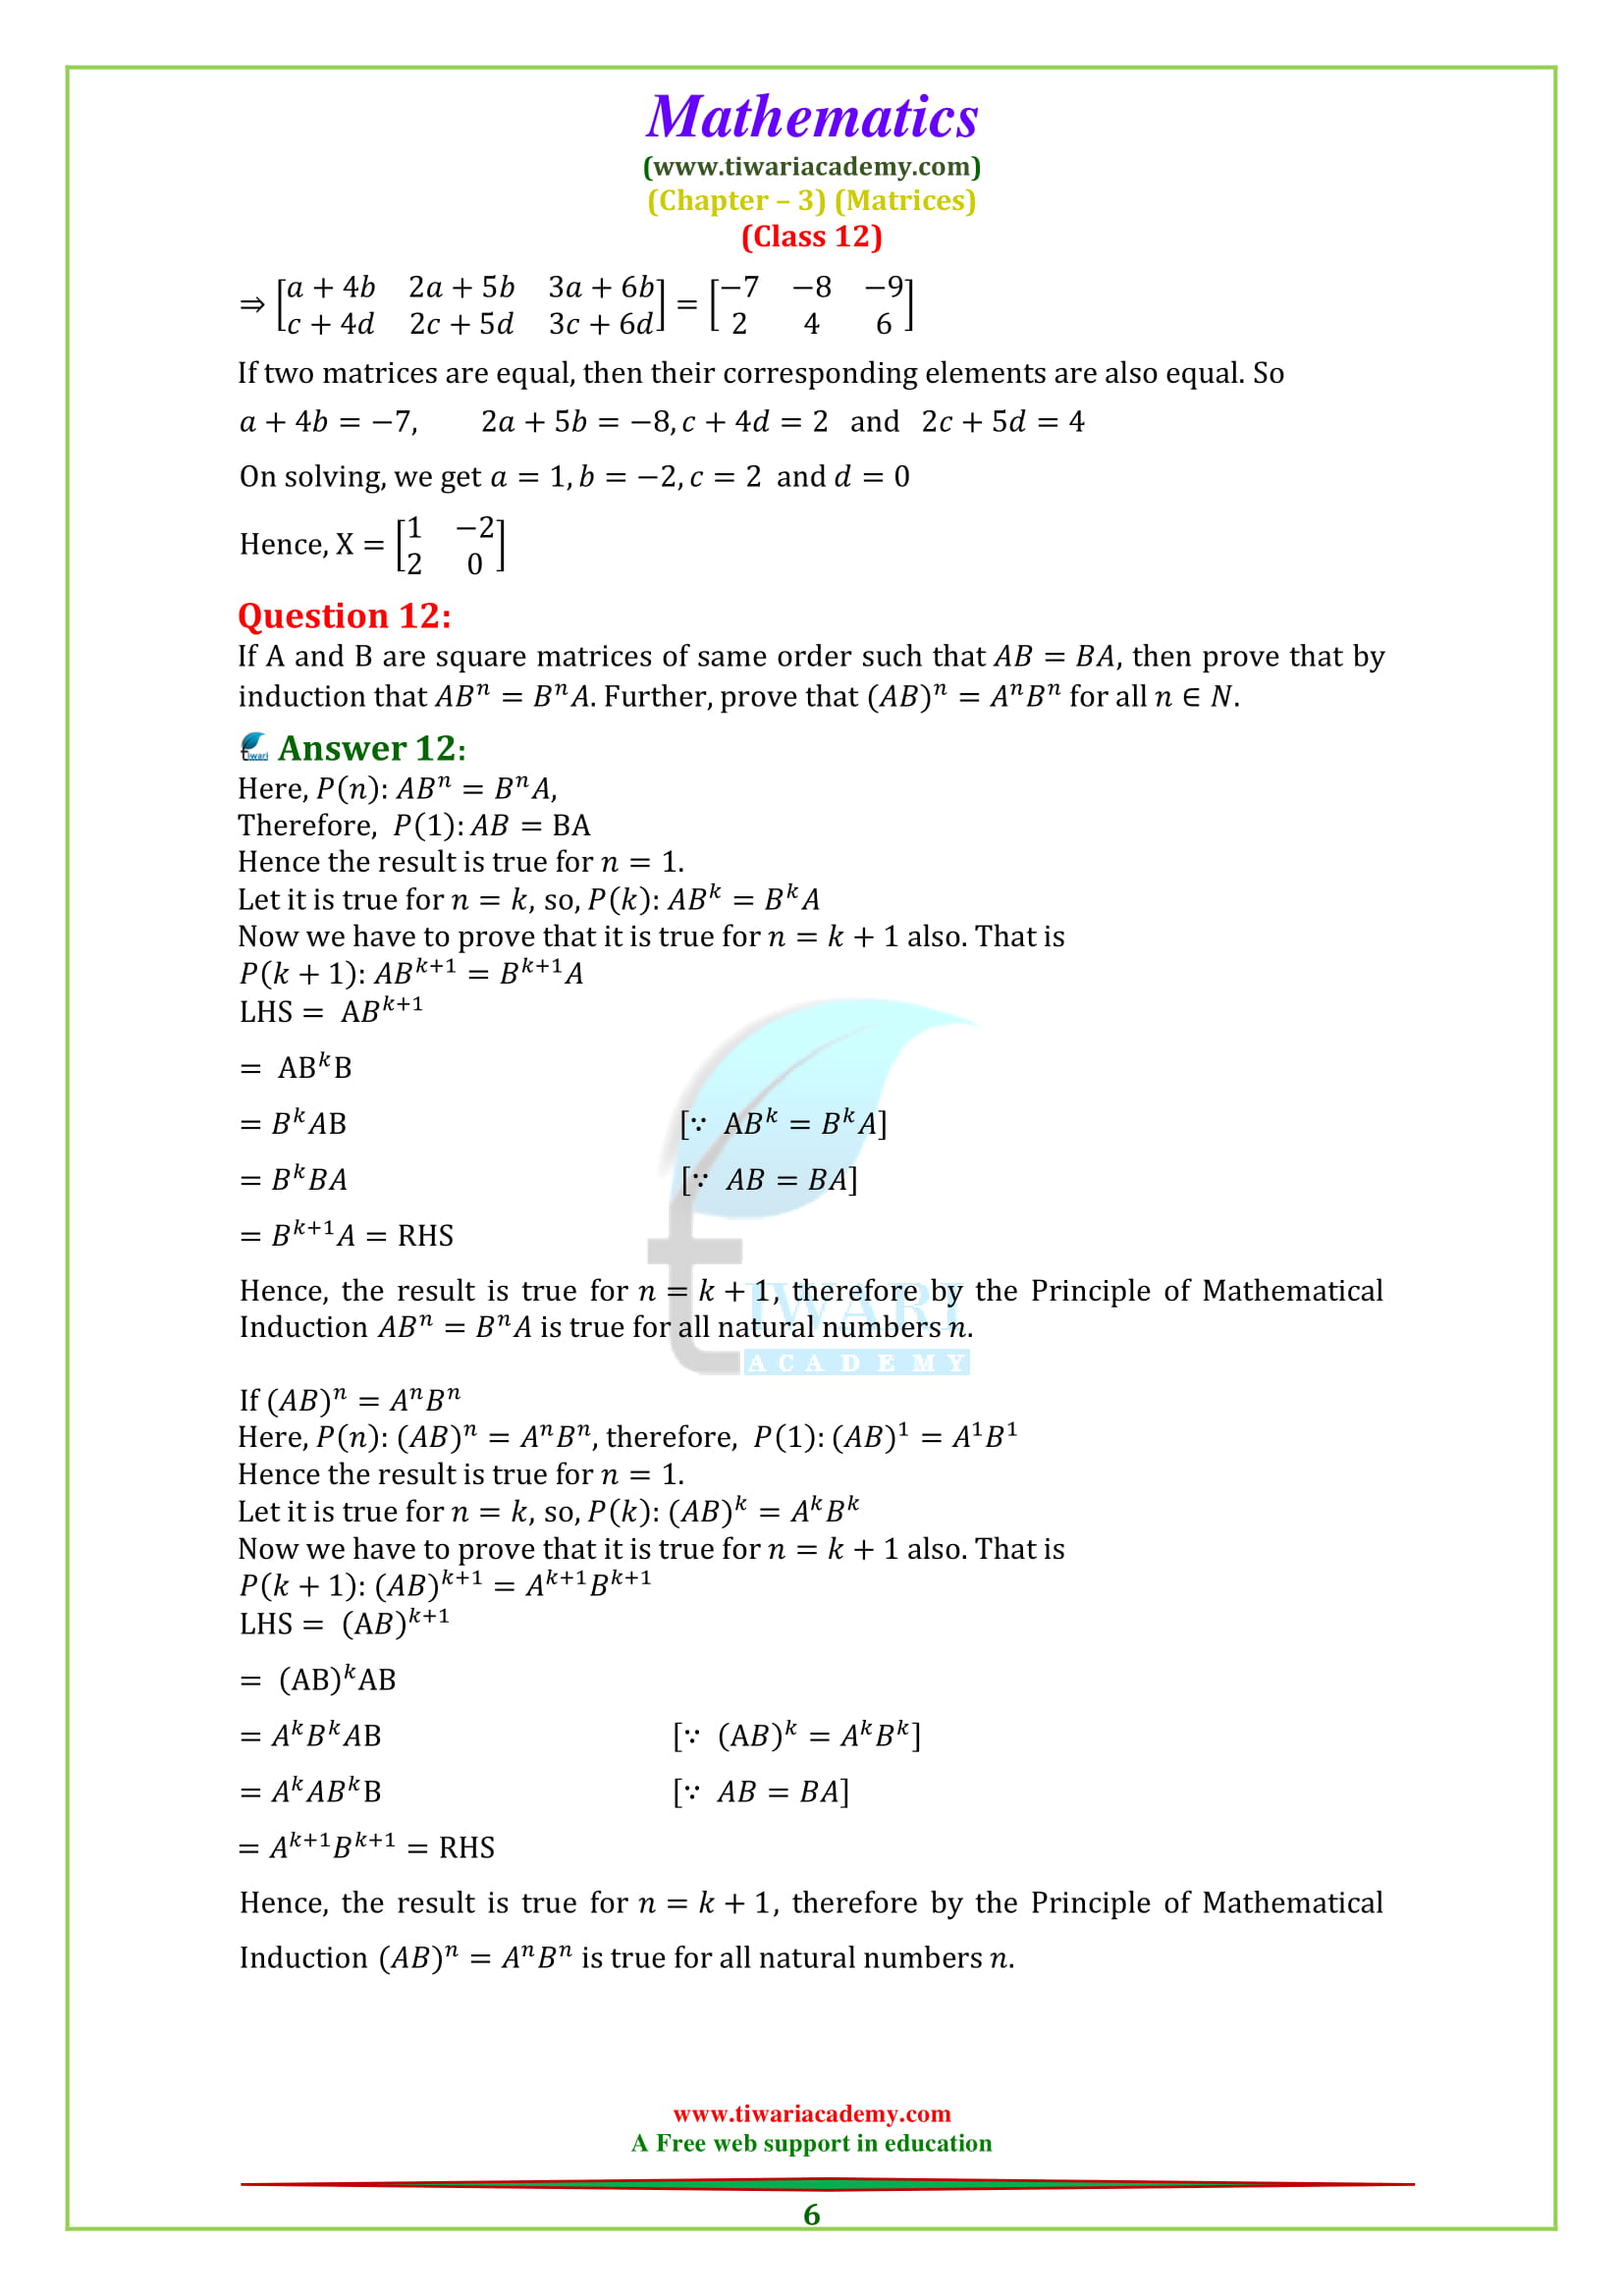 Class 12 Maths Chapter 3 Miscellaneous Exercise 3 Matrices Solutions Question 1, 2, 3, 4, 5, 6, 7, 8